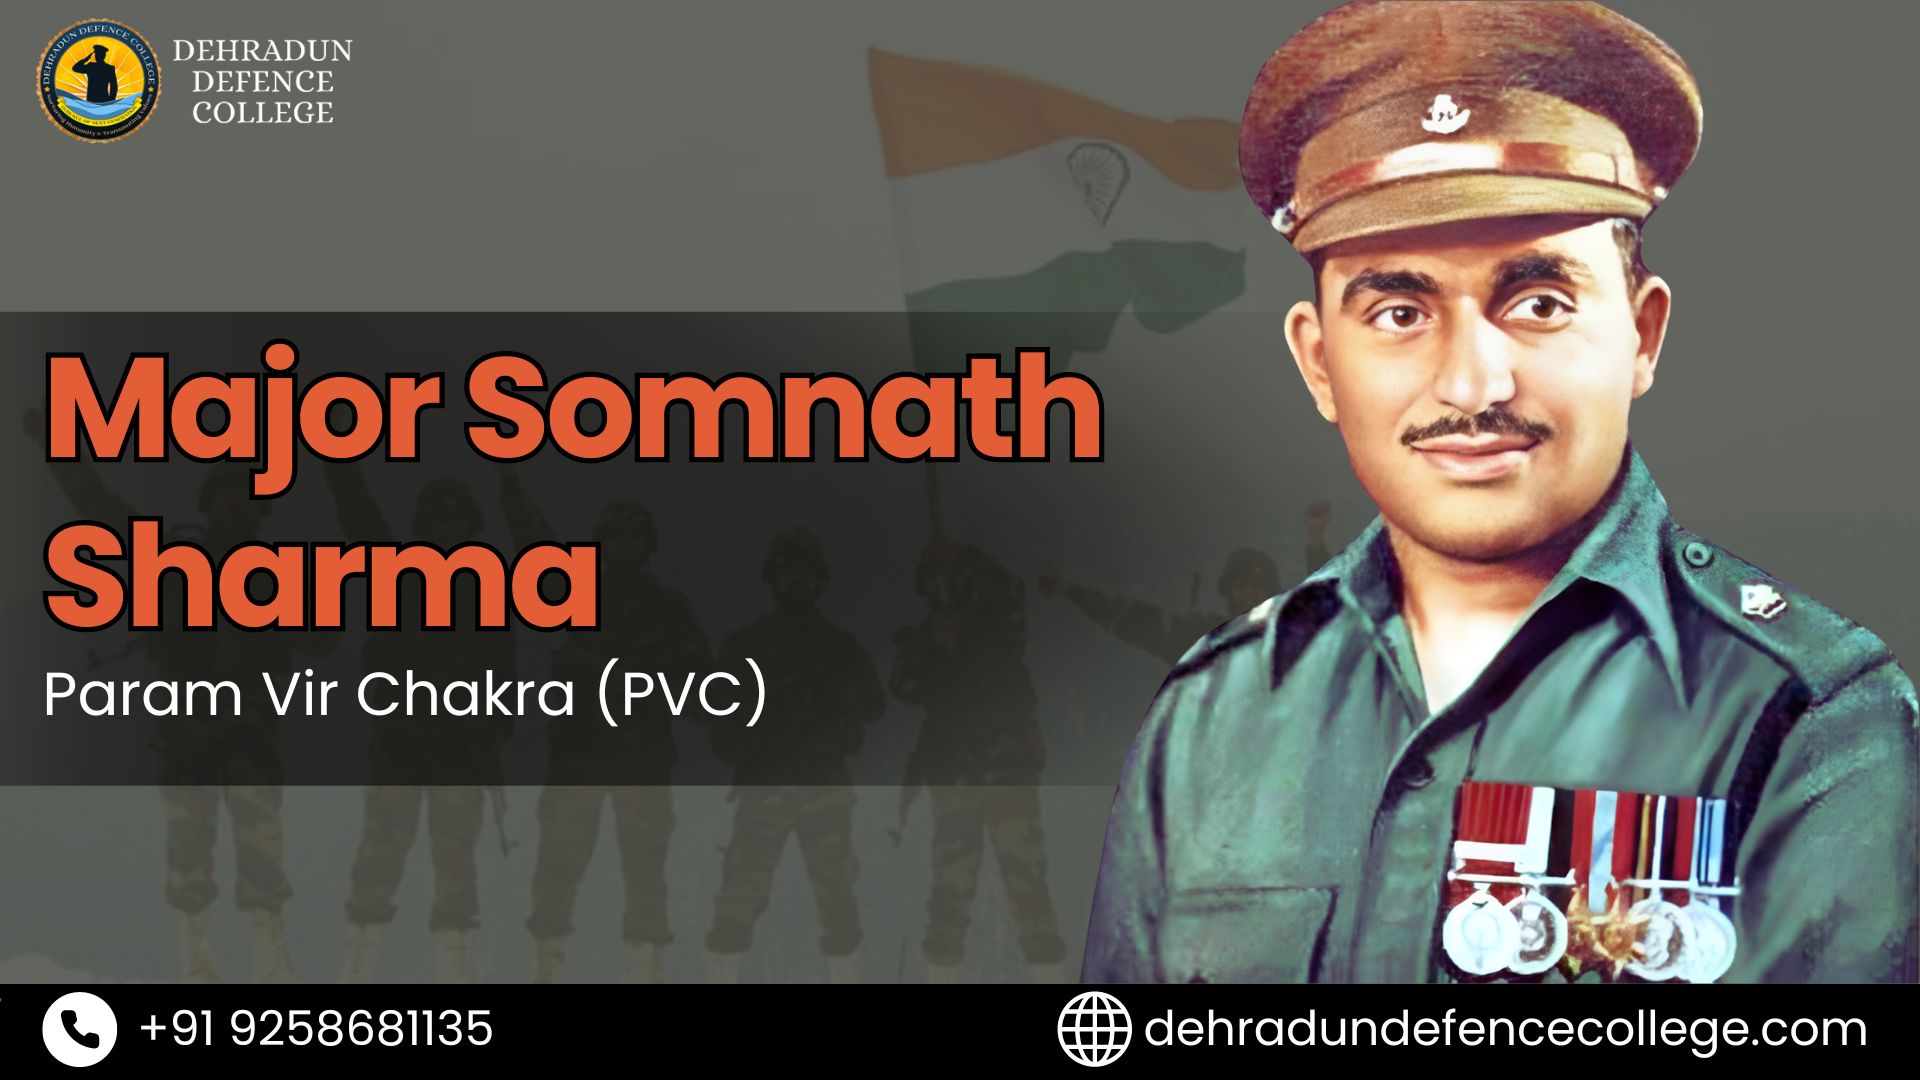 Major Somnath Sharma PVC: The Courageous Sentinel of India